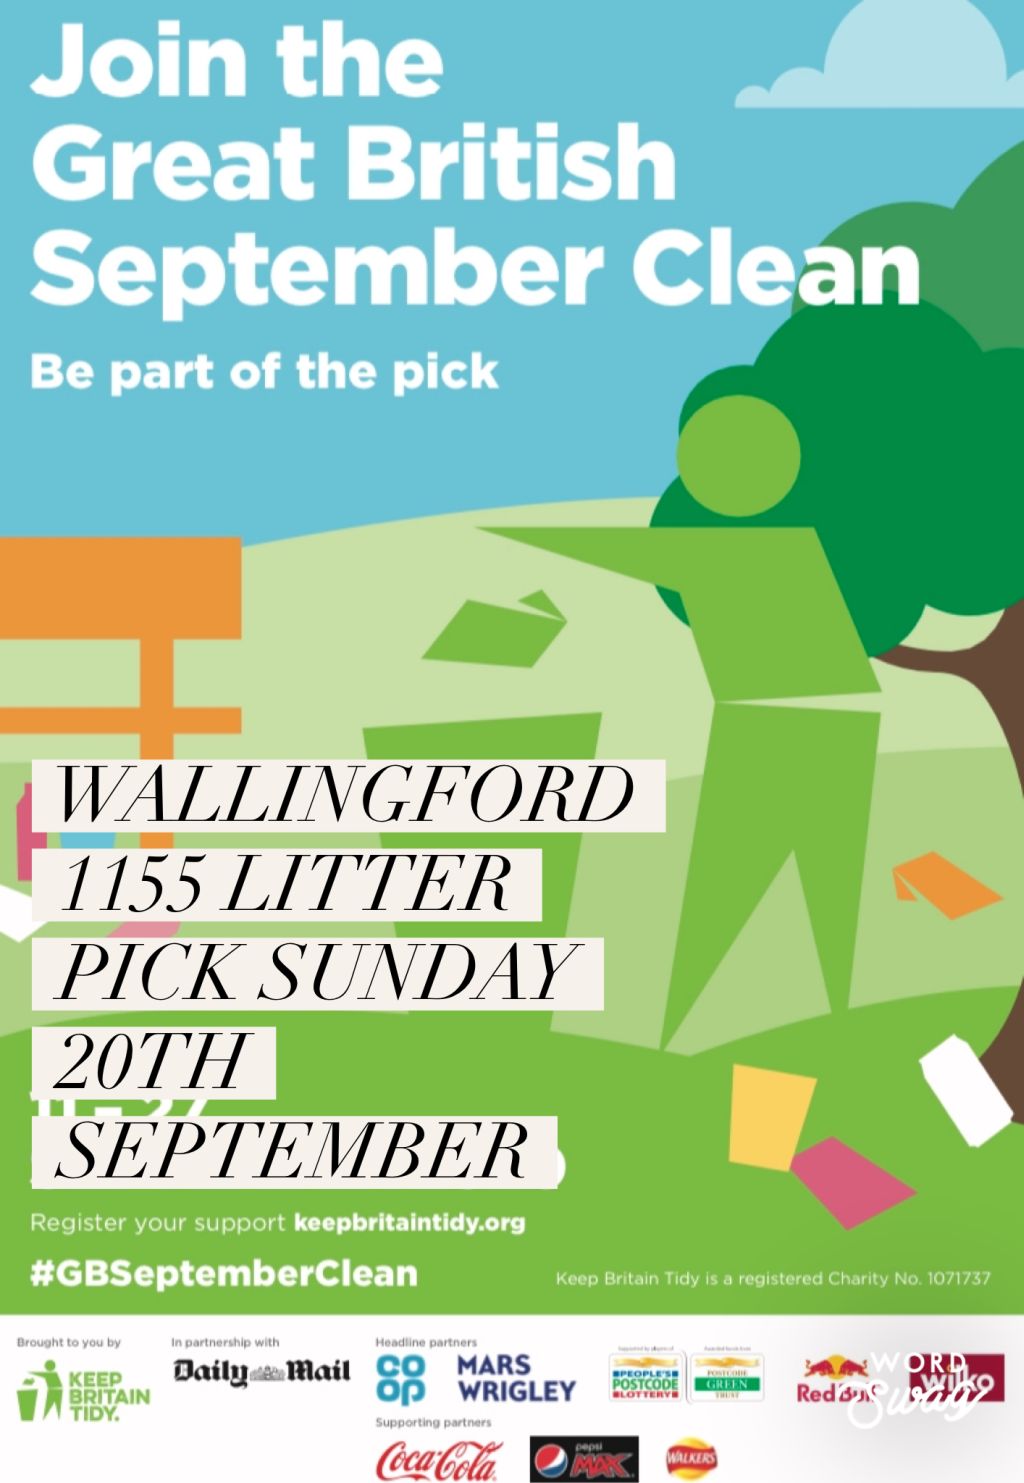 Join the Great British September Clean